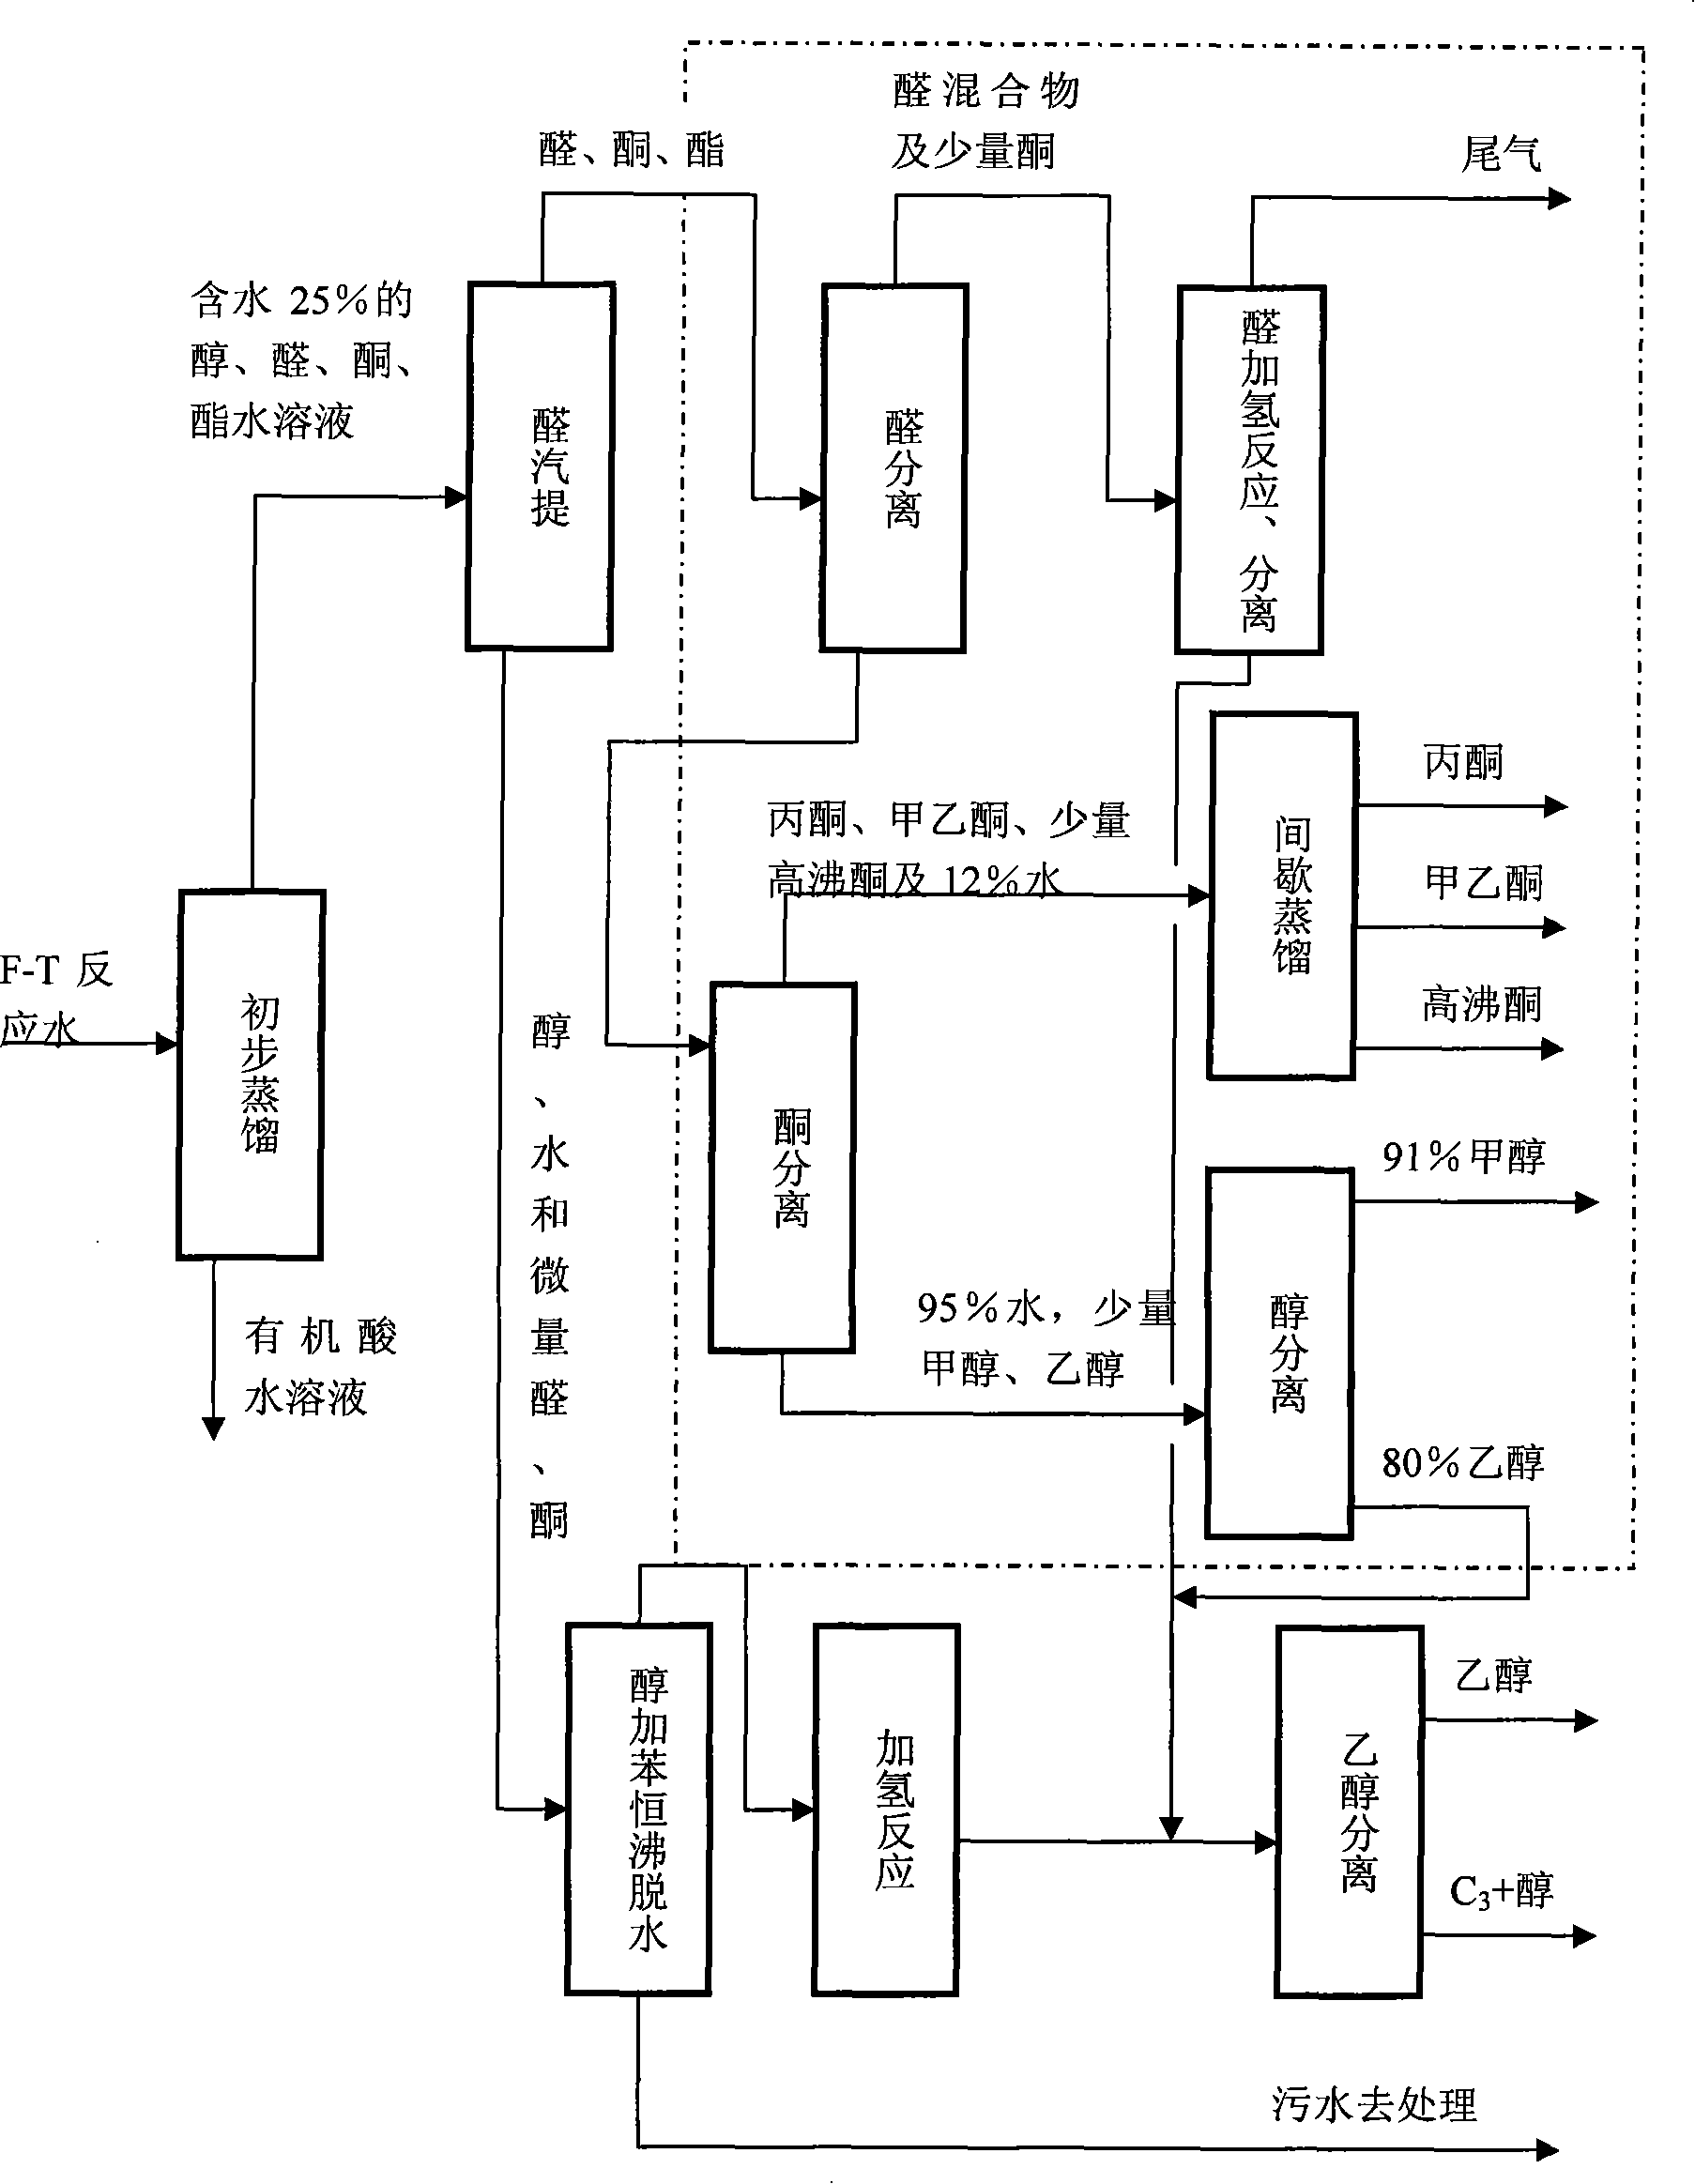 Method for separating and reclaiming organic matter from high-temperature Fischer-Tropsch synthesis reaction water